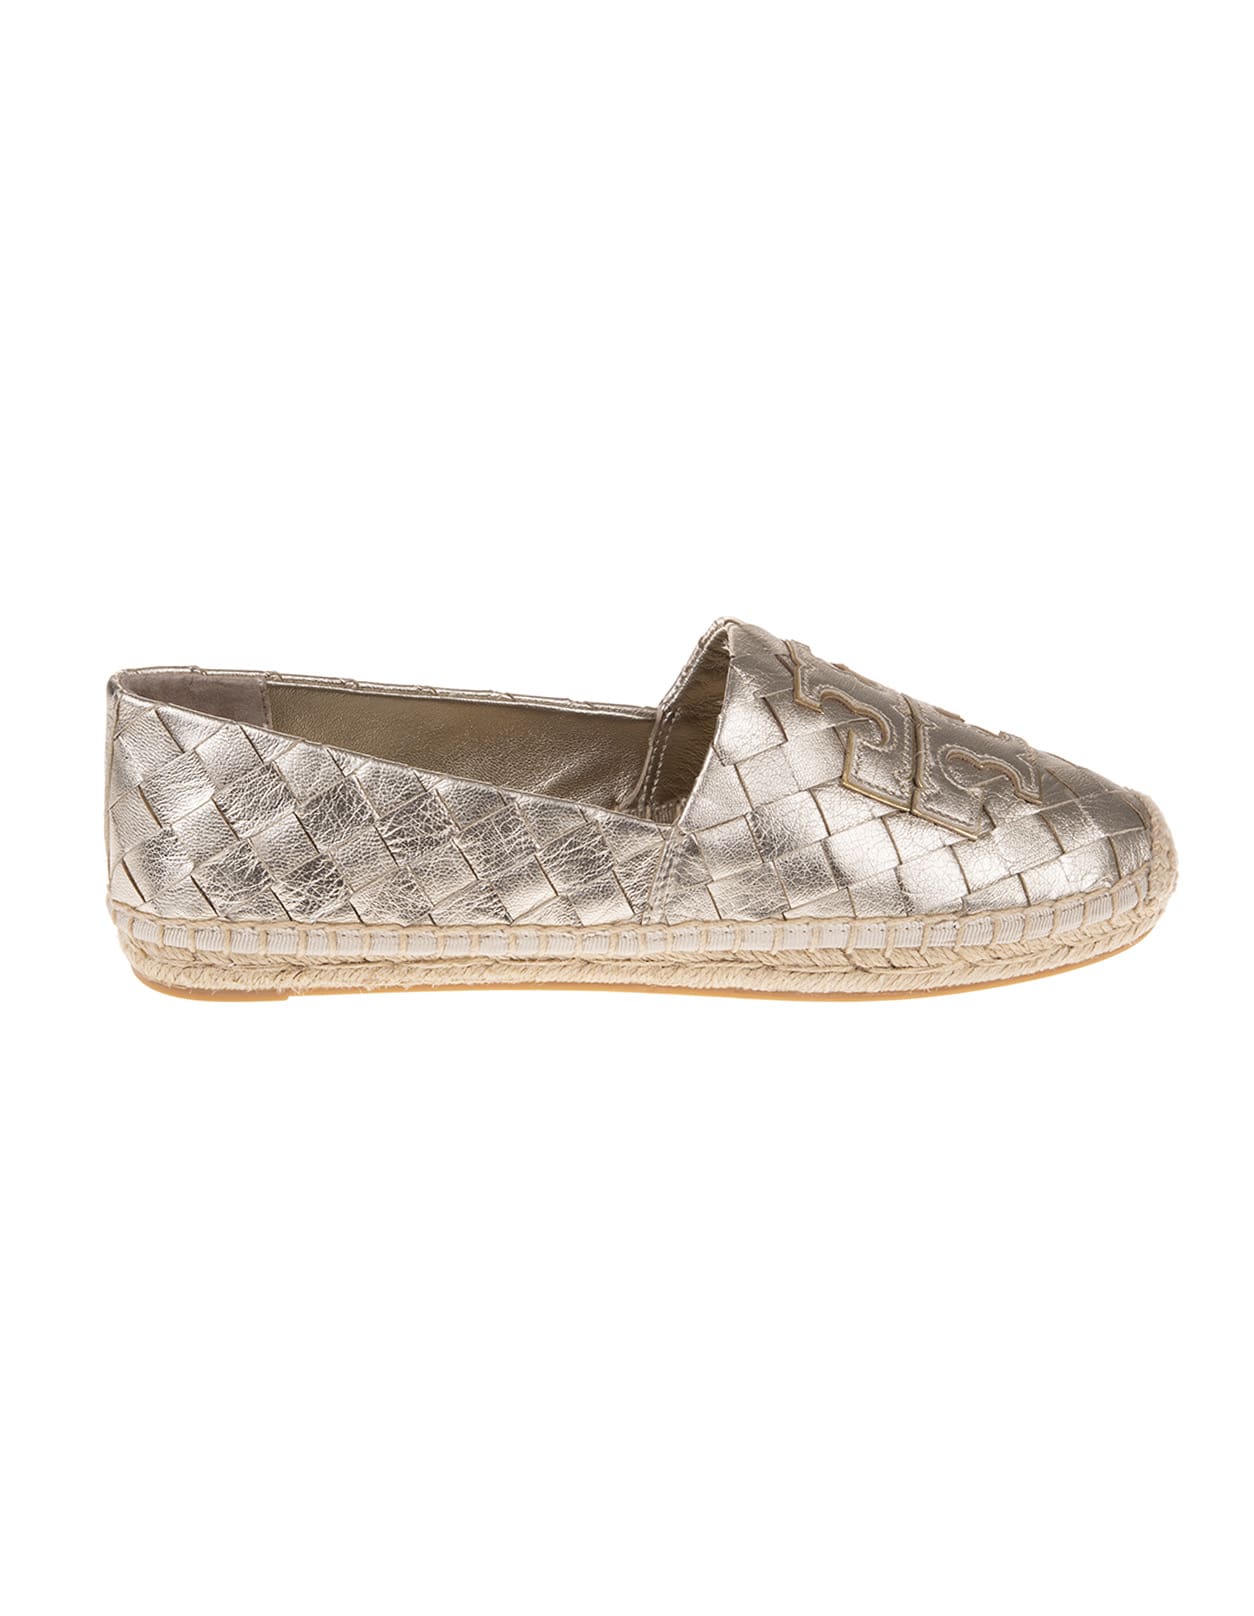 Buy Tory Burch Ines Espadrilles In Platinum Metallic Leather online, shop Tory Burch shoes with free shipping